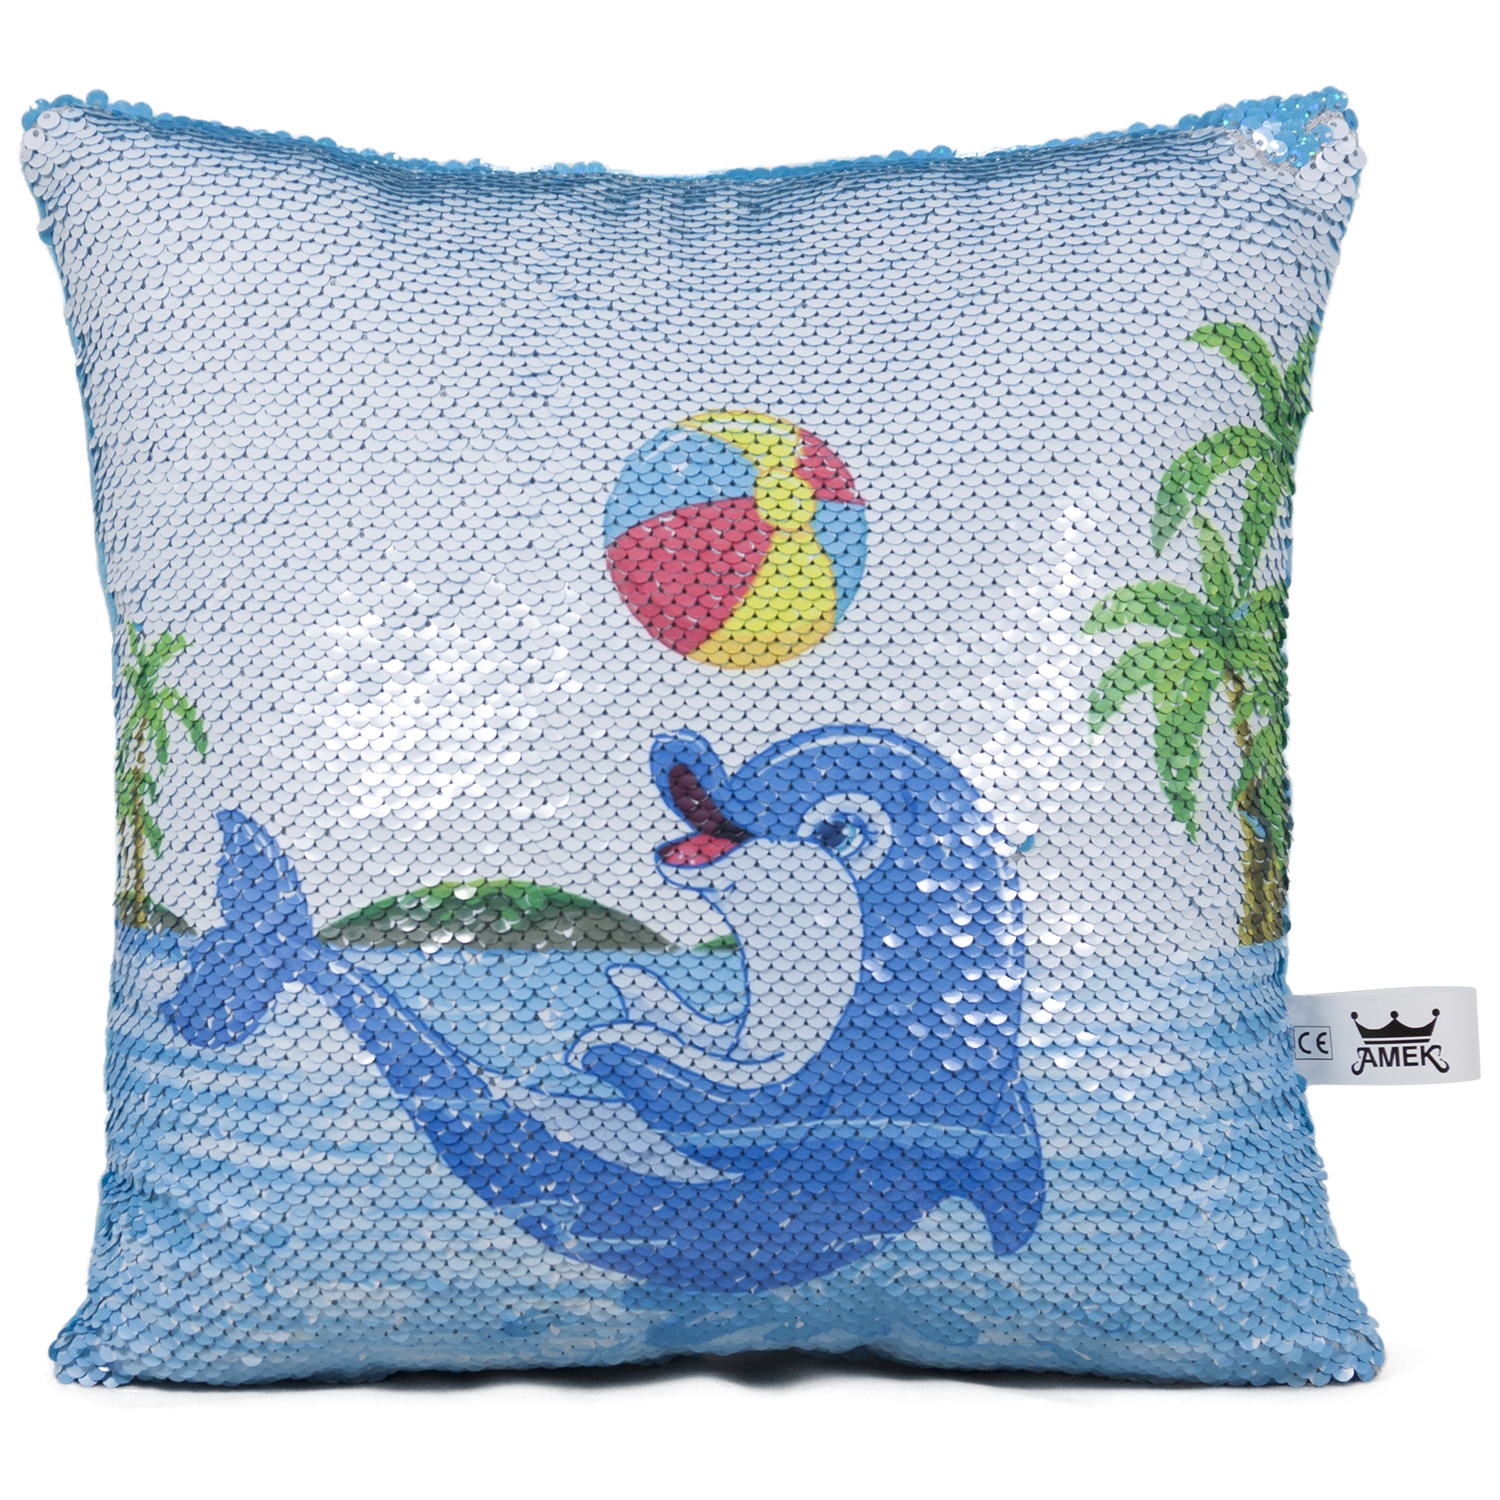 Pillow with dolphin and sequins